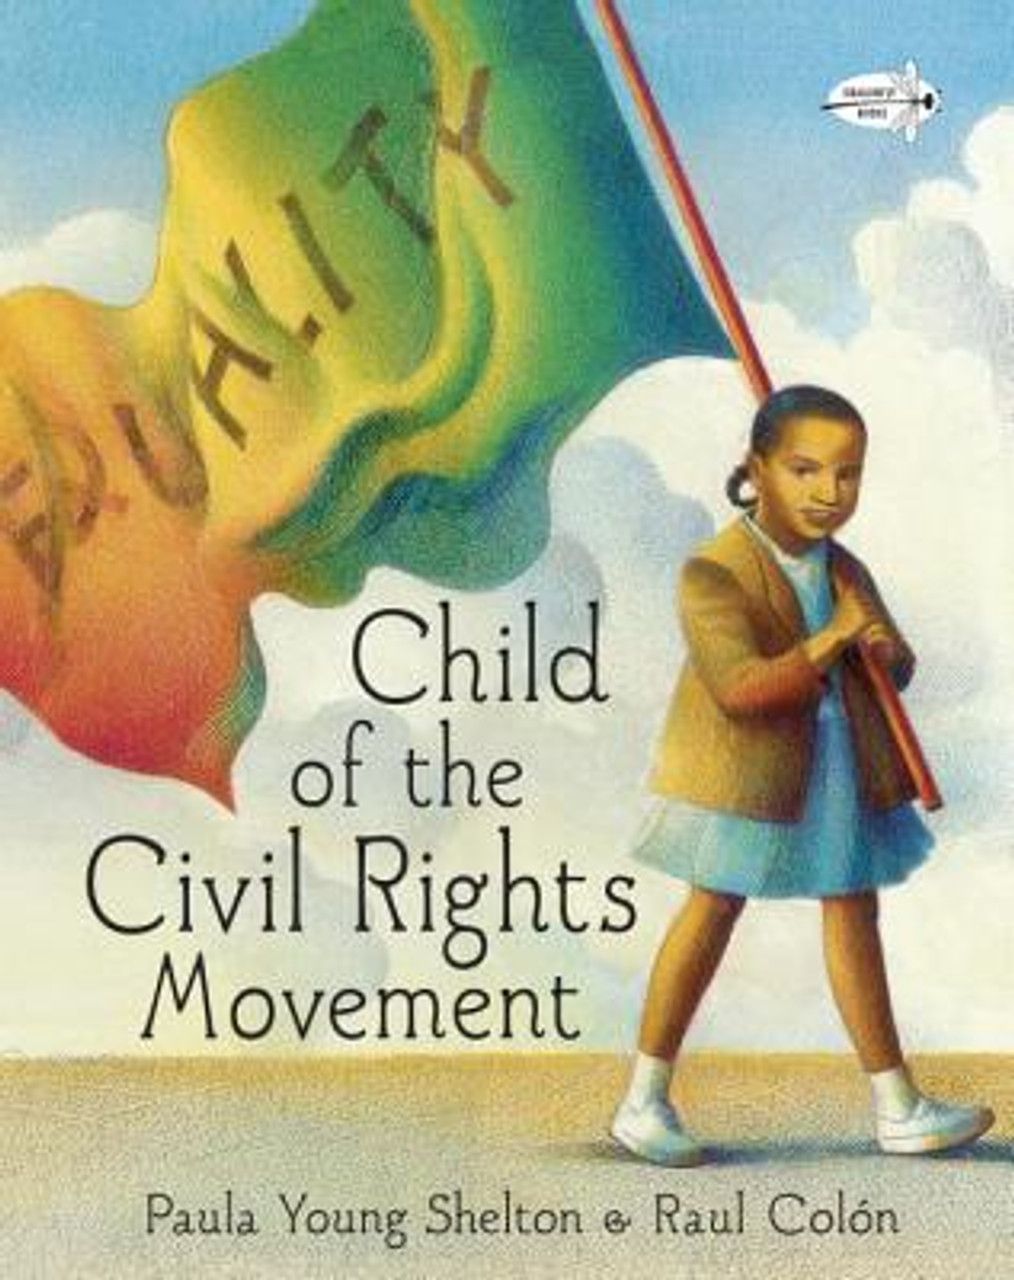 image of cover of the book Child of the Civil Rights Movement by Paula Young Shelton and Raul Colon